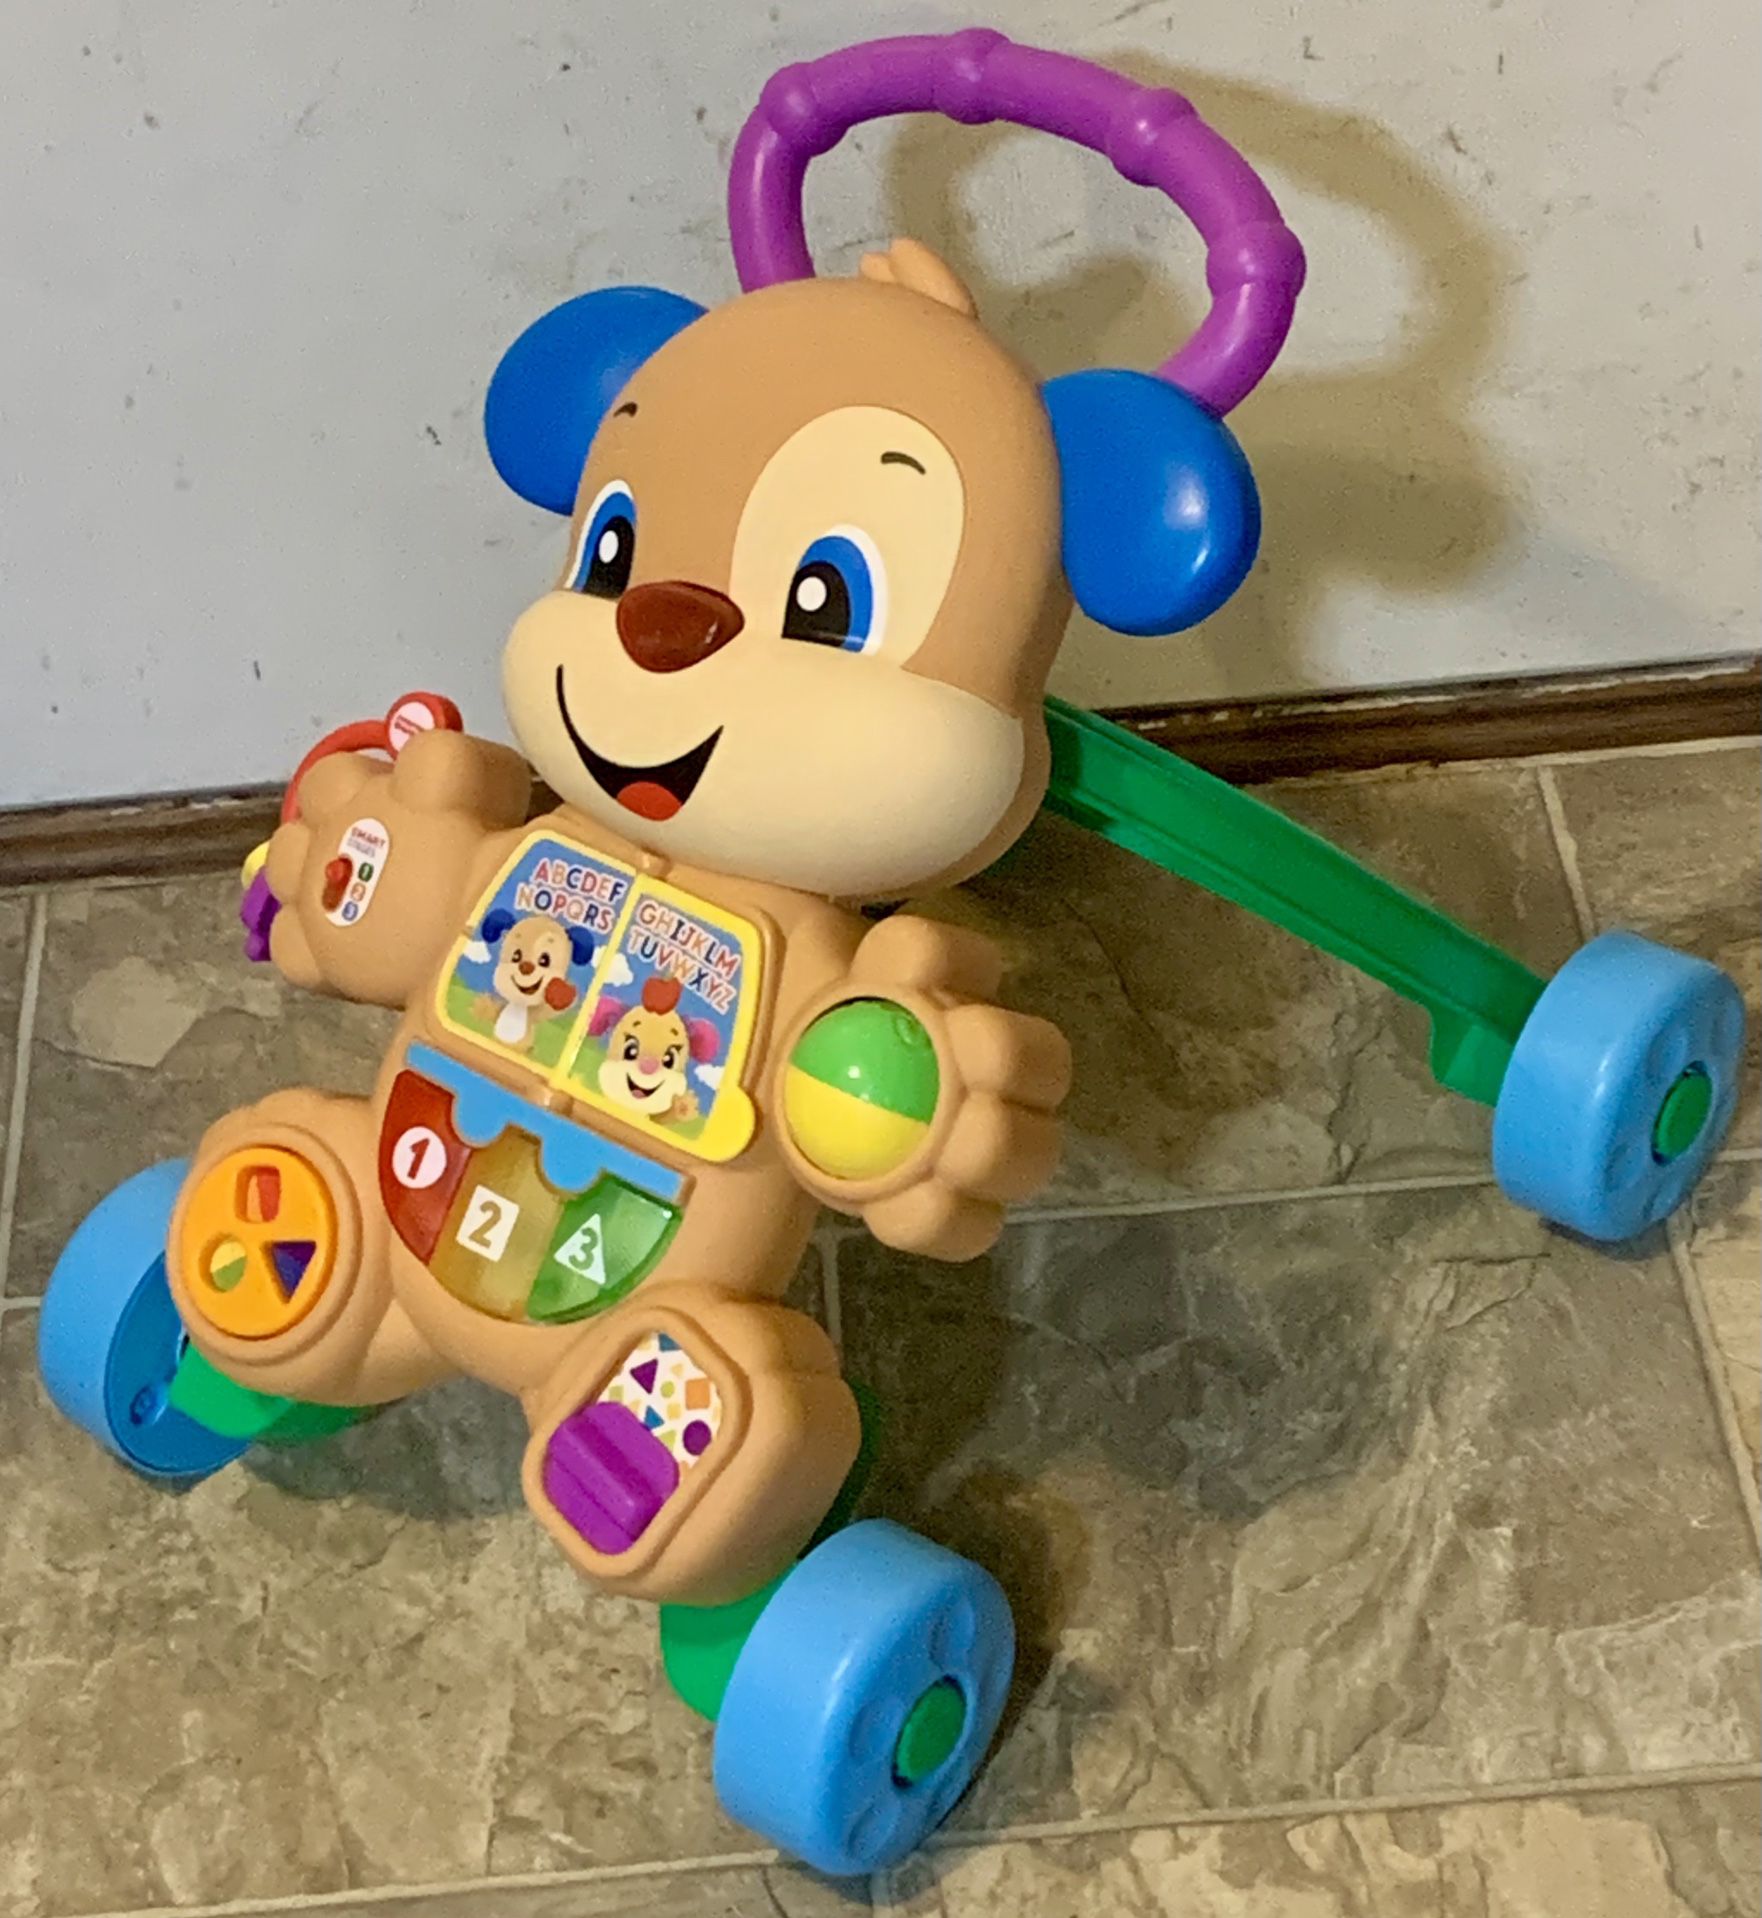 Baby Push Toy $13.00.  Gently Used/like New